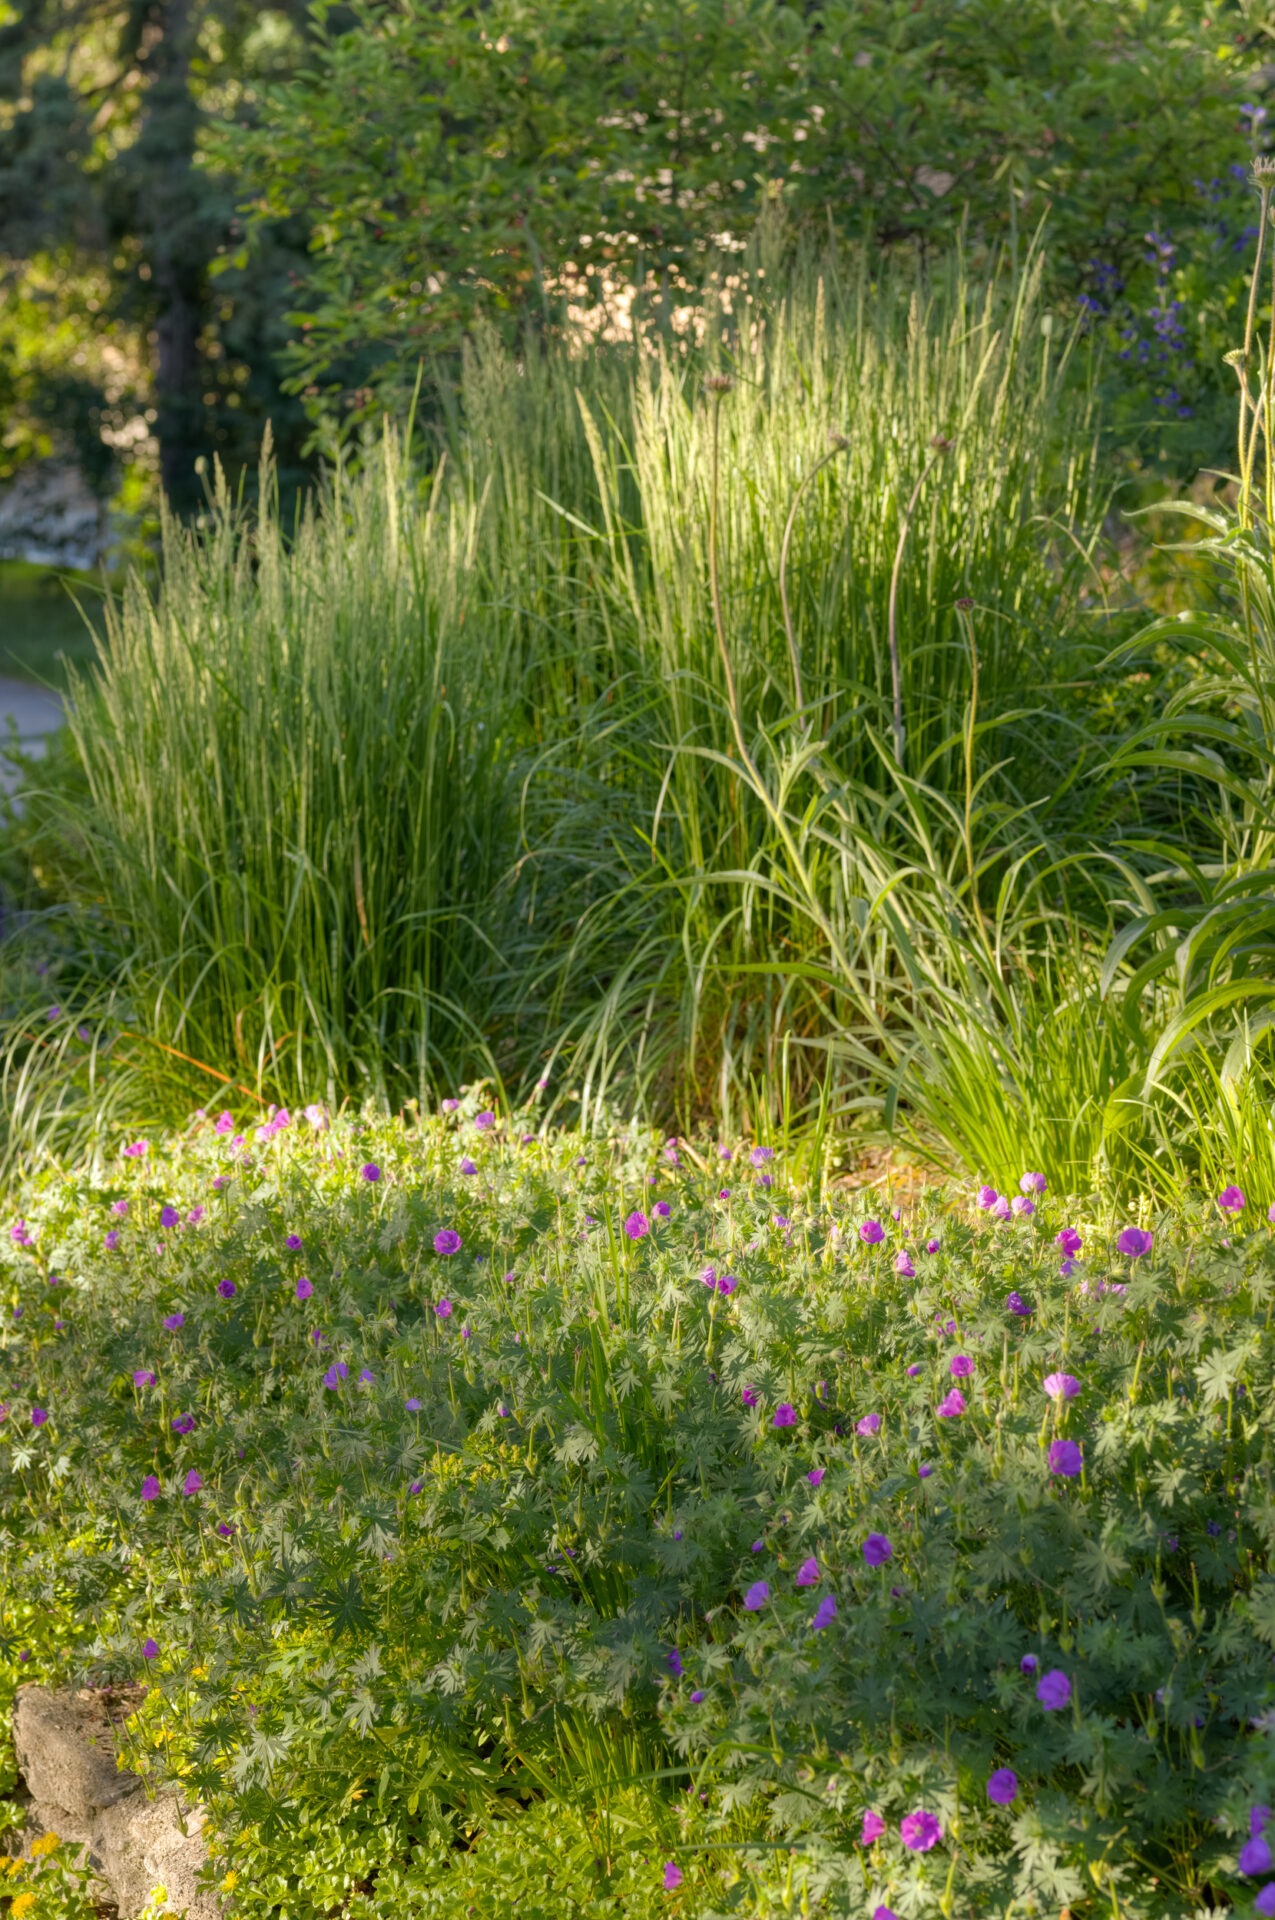 A serene garden filled with various plants; tall grasses in the back and vibrant purple flowers in the foreground, illuminated by soft sunlight.